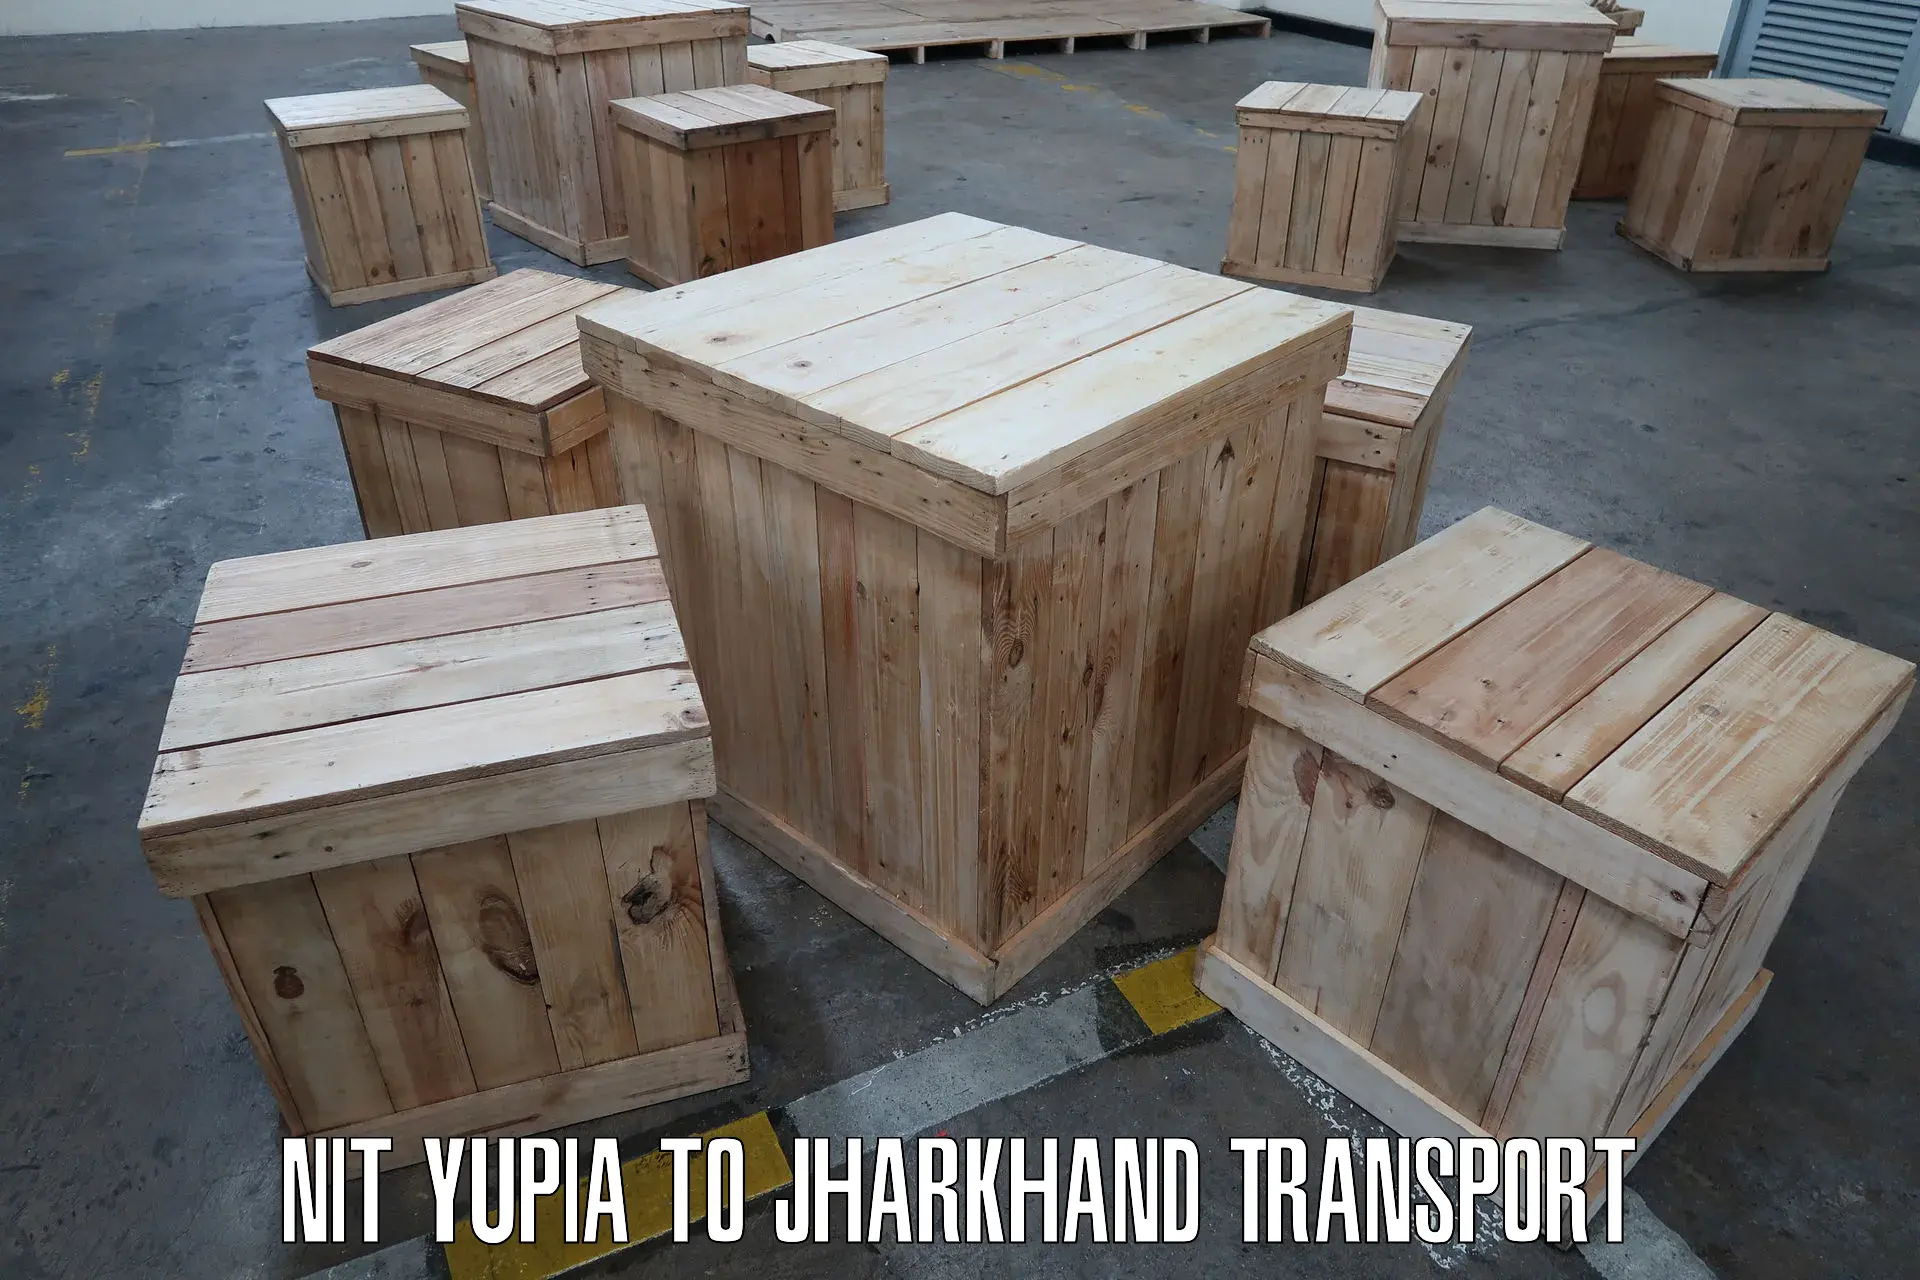 Air cargo transport services NIT Yupia to Jamshedpur